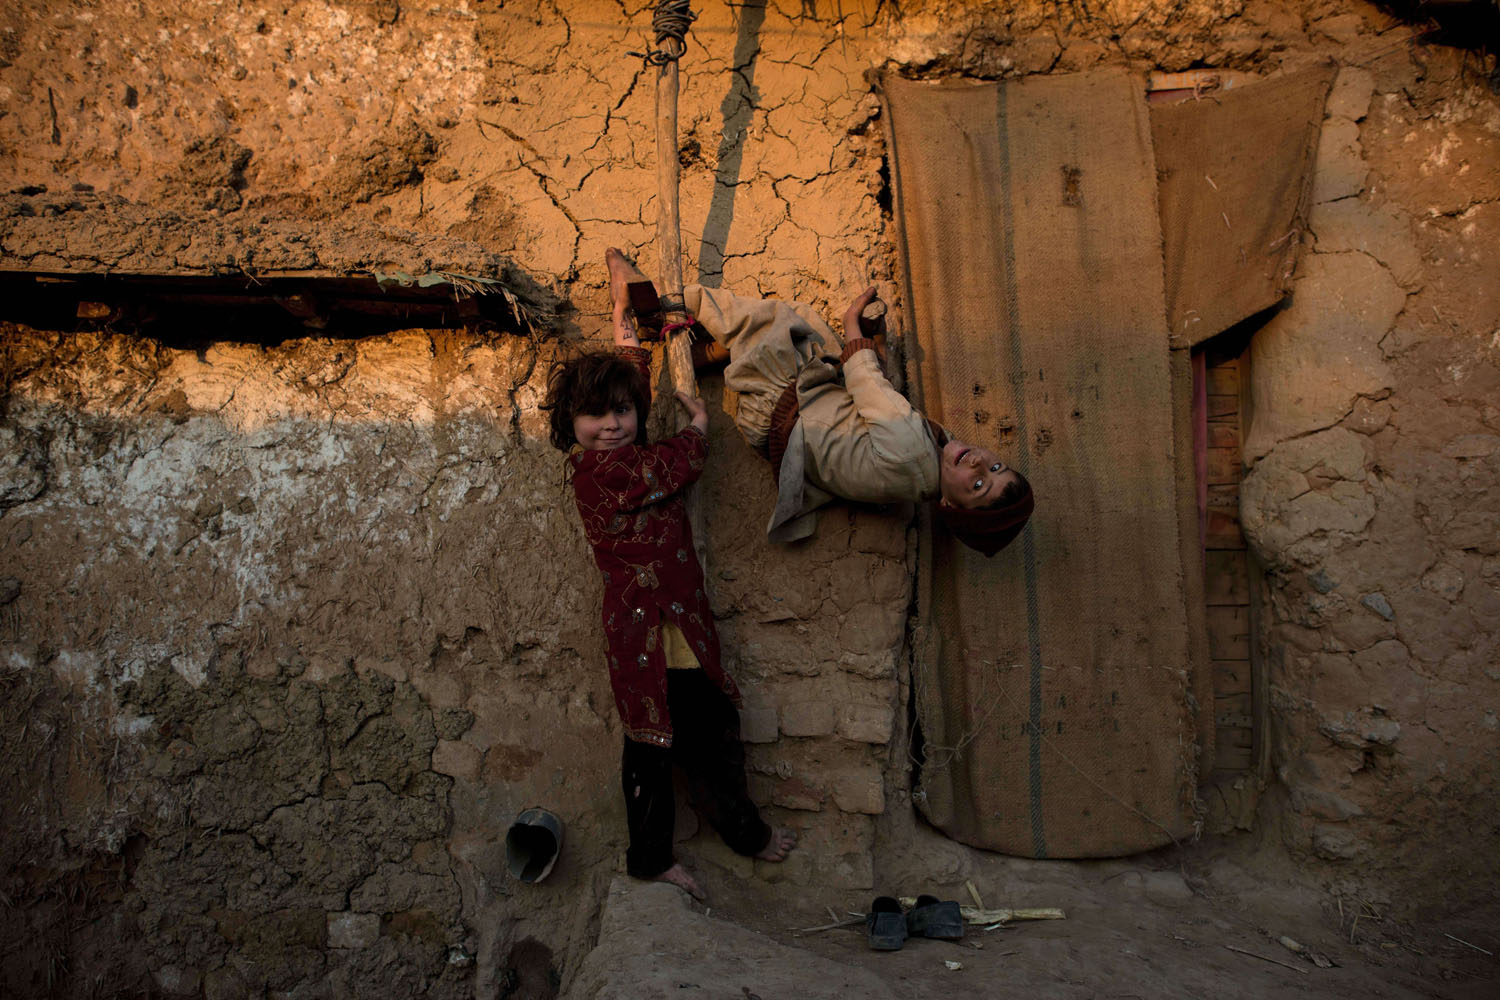 Feb. 9, 2014. Afghan children, whose family fled their home country to Pakistan, play outside their makeshift shelter in a slum on the outskirts of Islamabad.